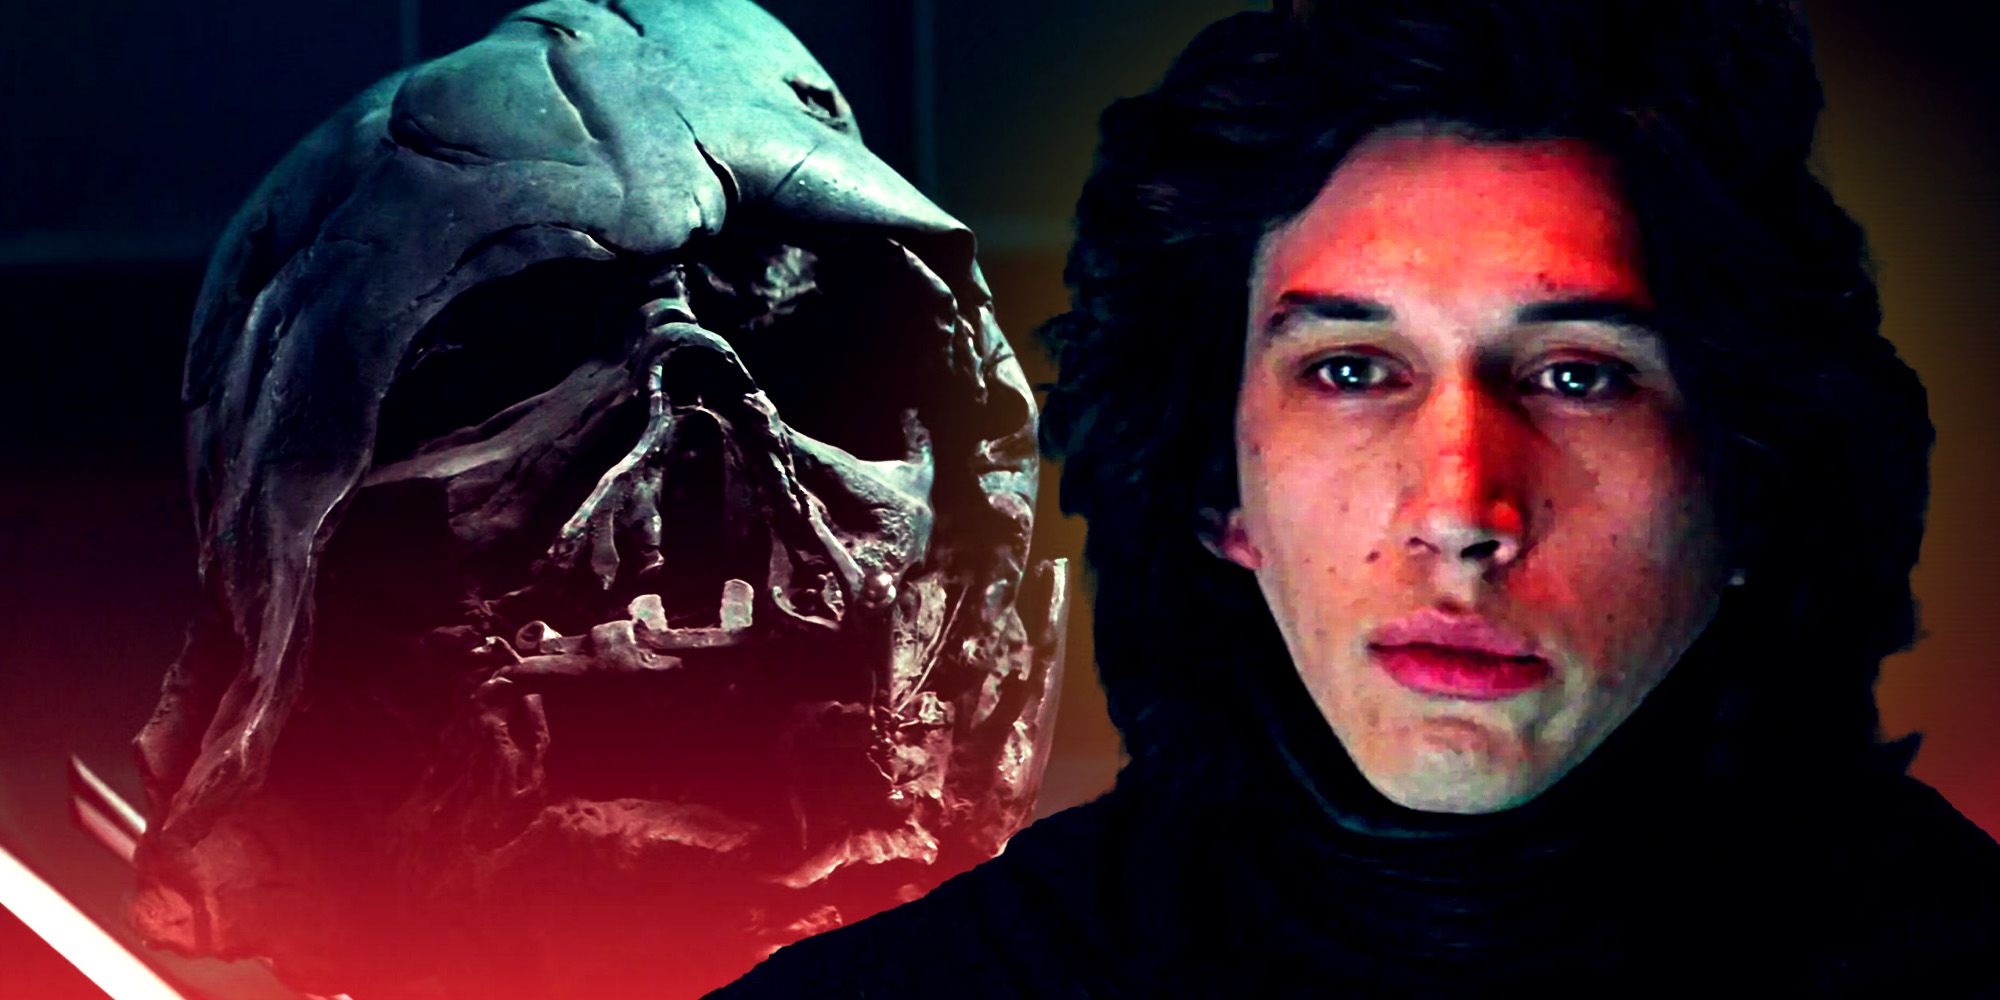 A split image of Darth Vaders mutilated helmet to the left and Kylo Ren without his helmet from The Force Awakens to the right